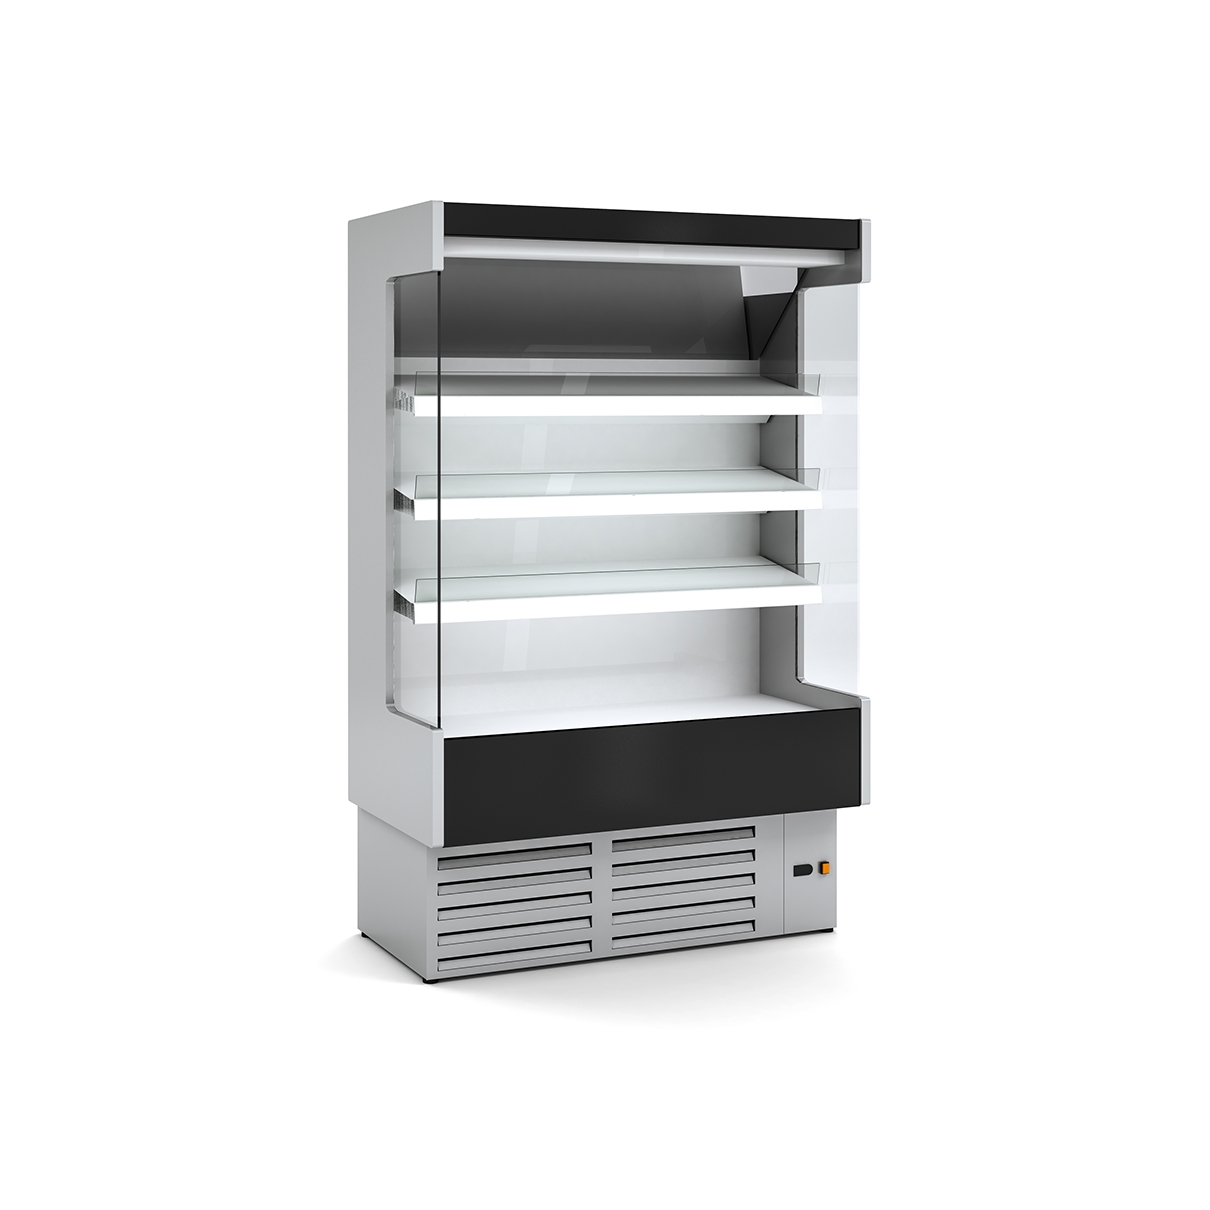 copy of REFRIGERATED WALL CABINET DS0 H1